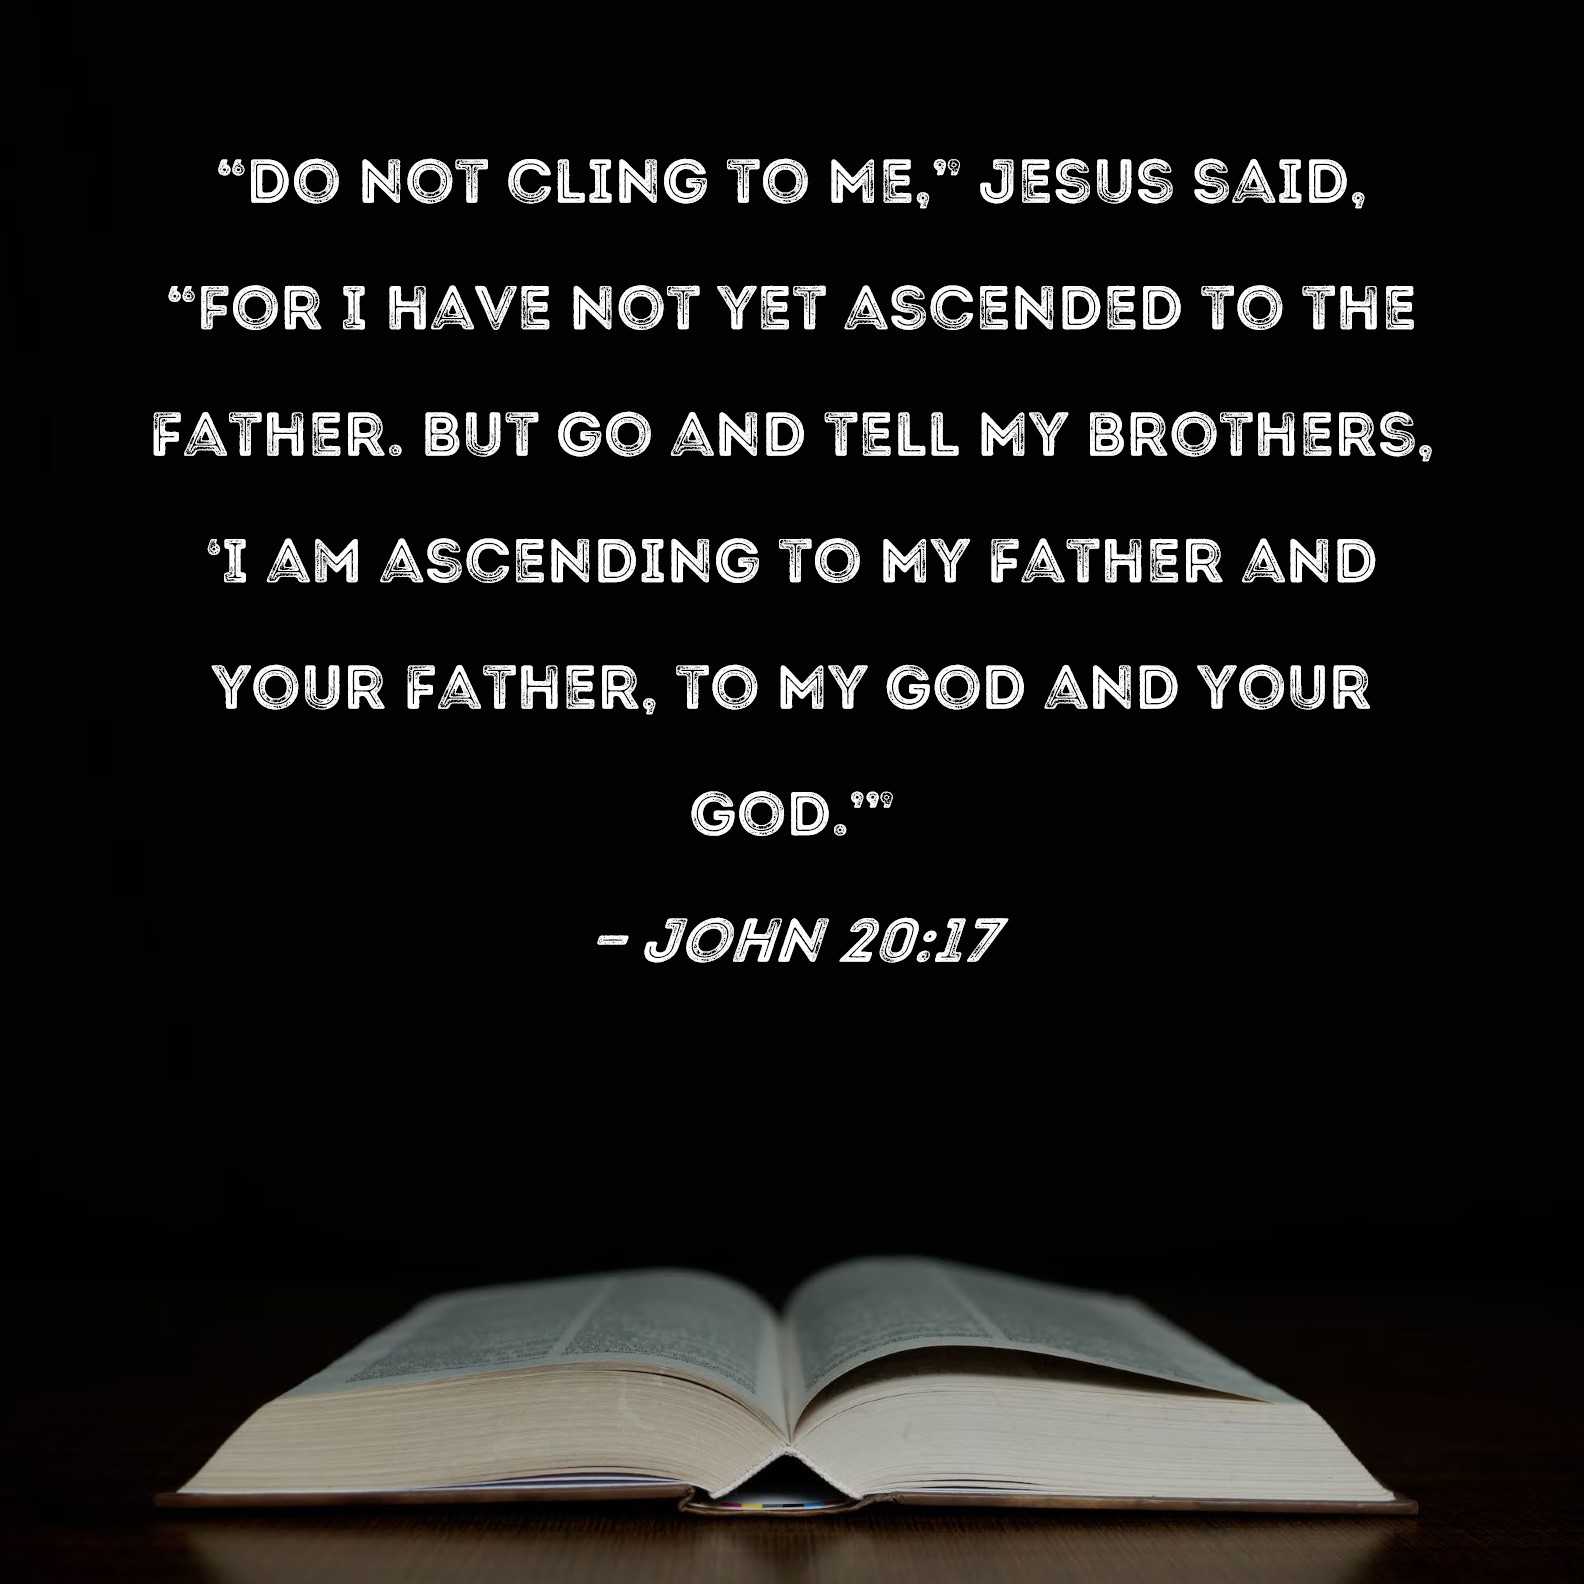 John 20:17 "Do not cling to Me," Jesus said, "for I have not yet ascended  to the Father. But go and tell My brothers, 'I am ascending to My Father  and your